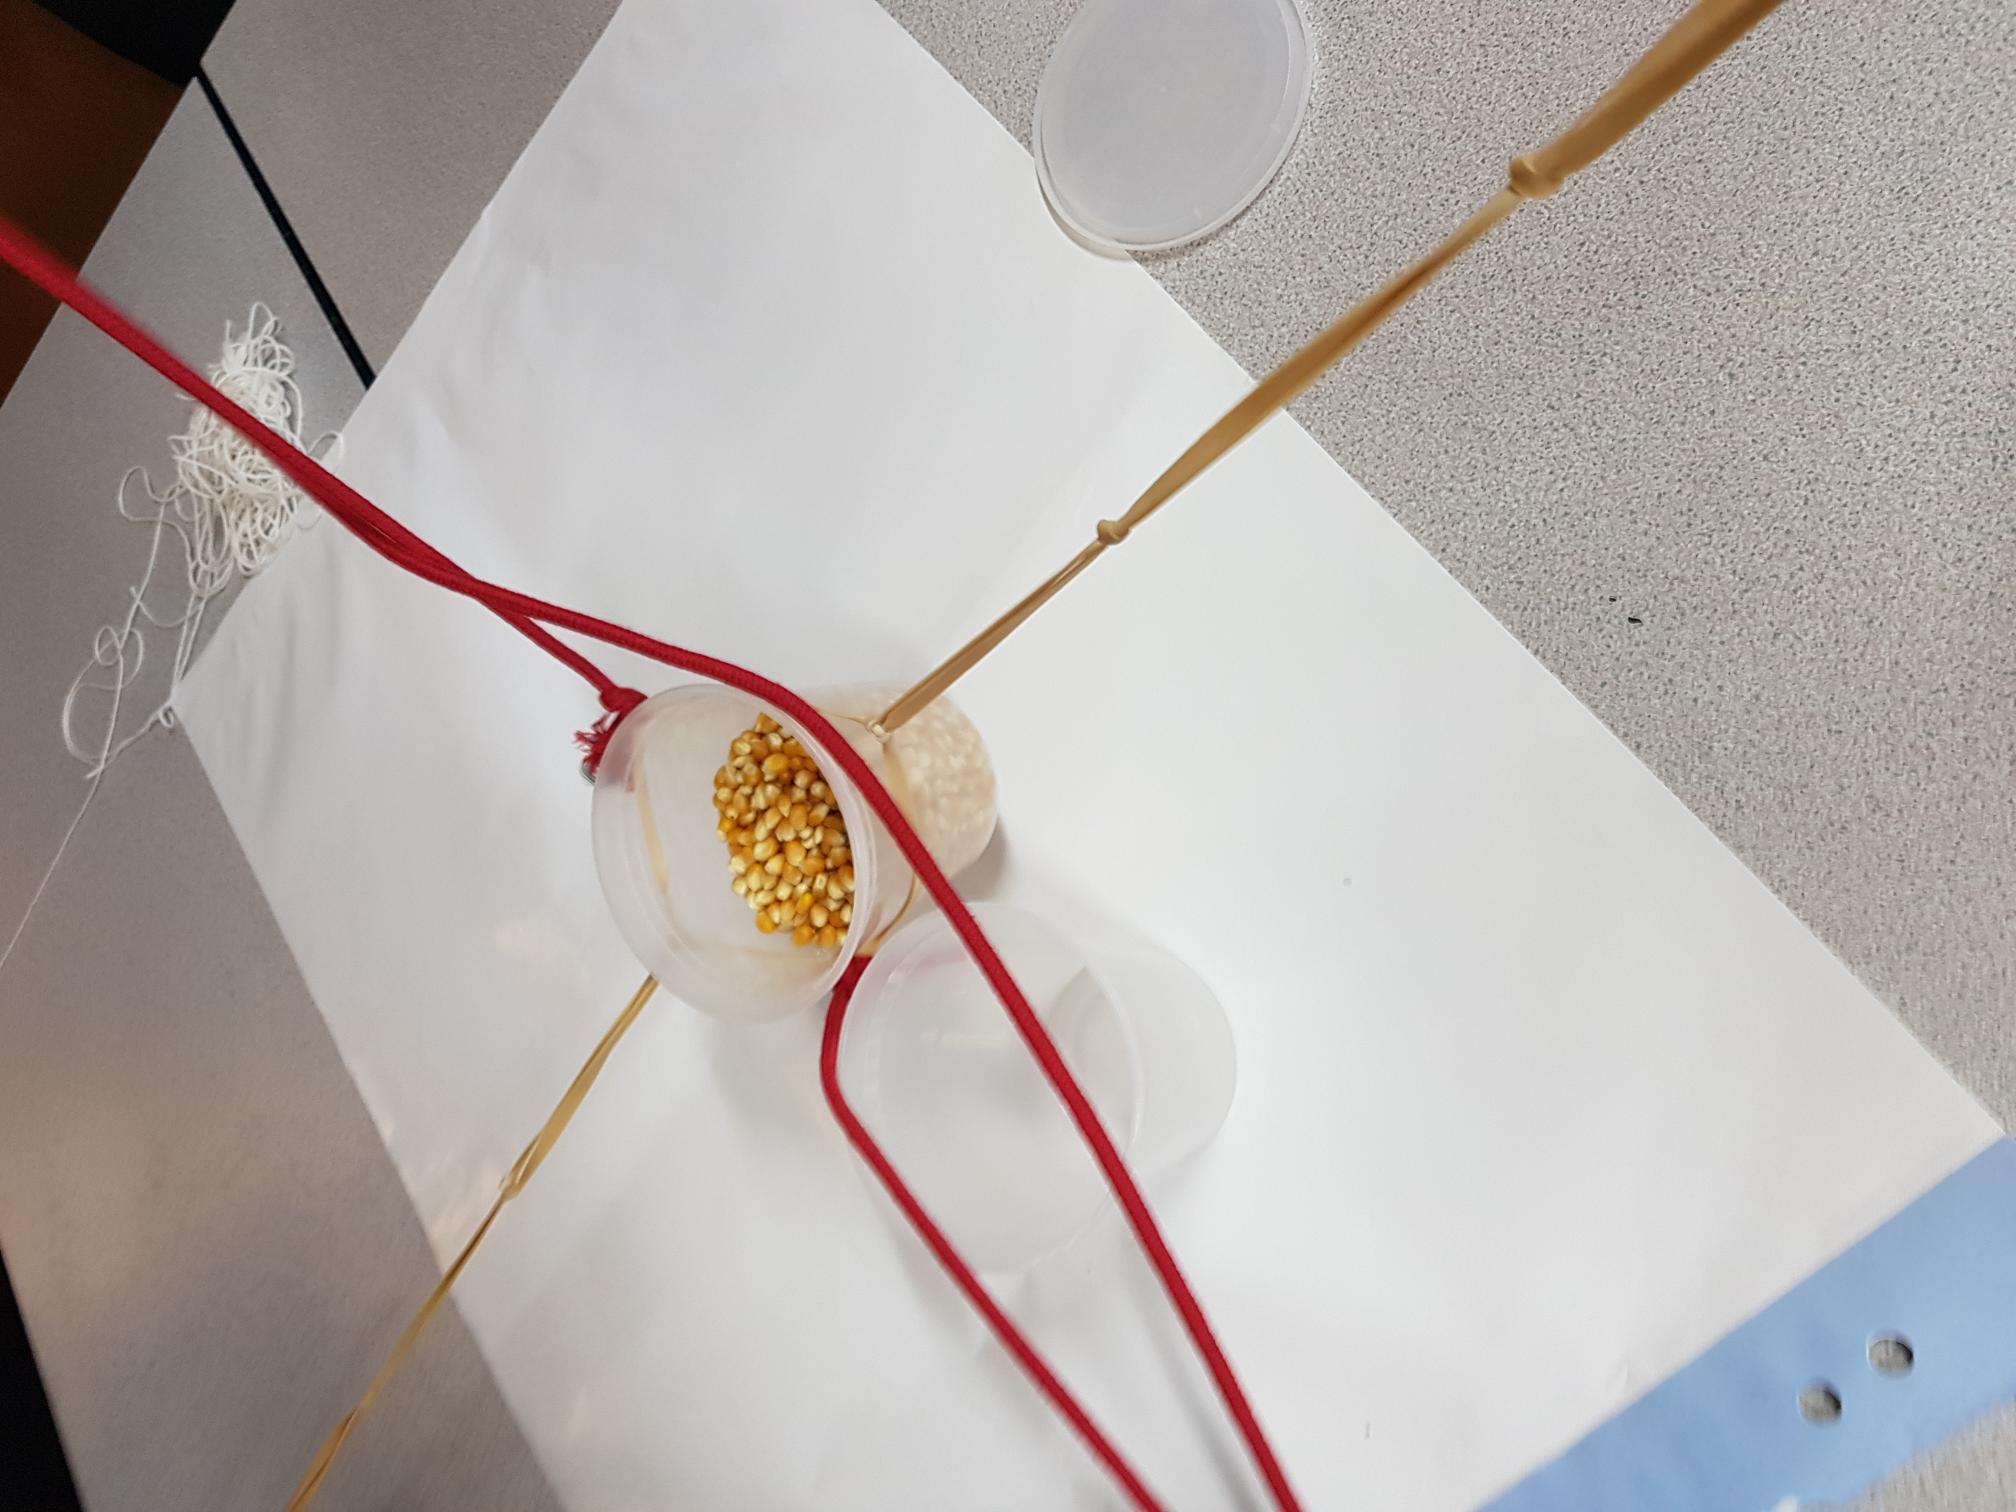 A container with Popcorn kernals inside is being pulled by pieces of string.